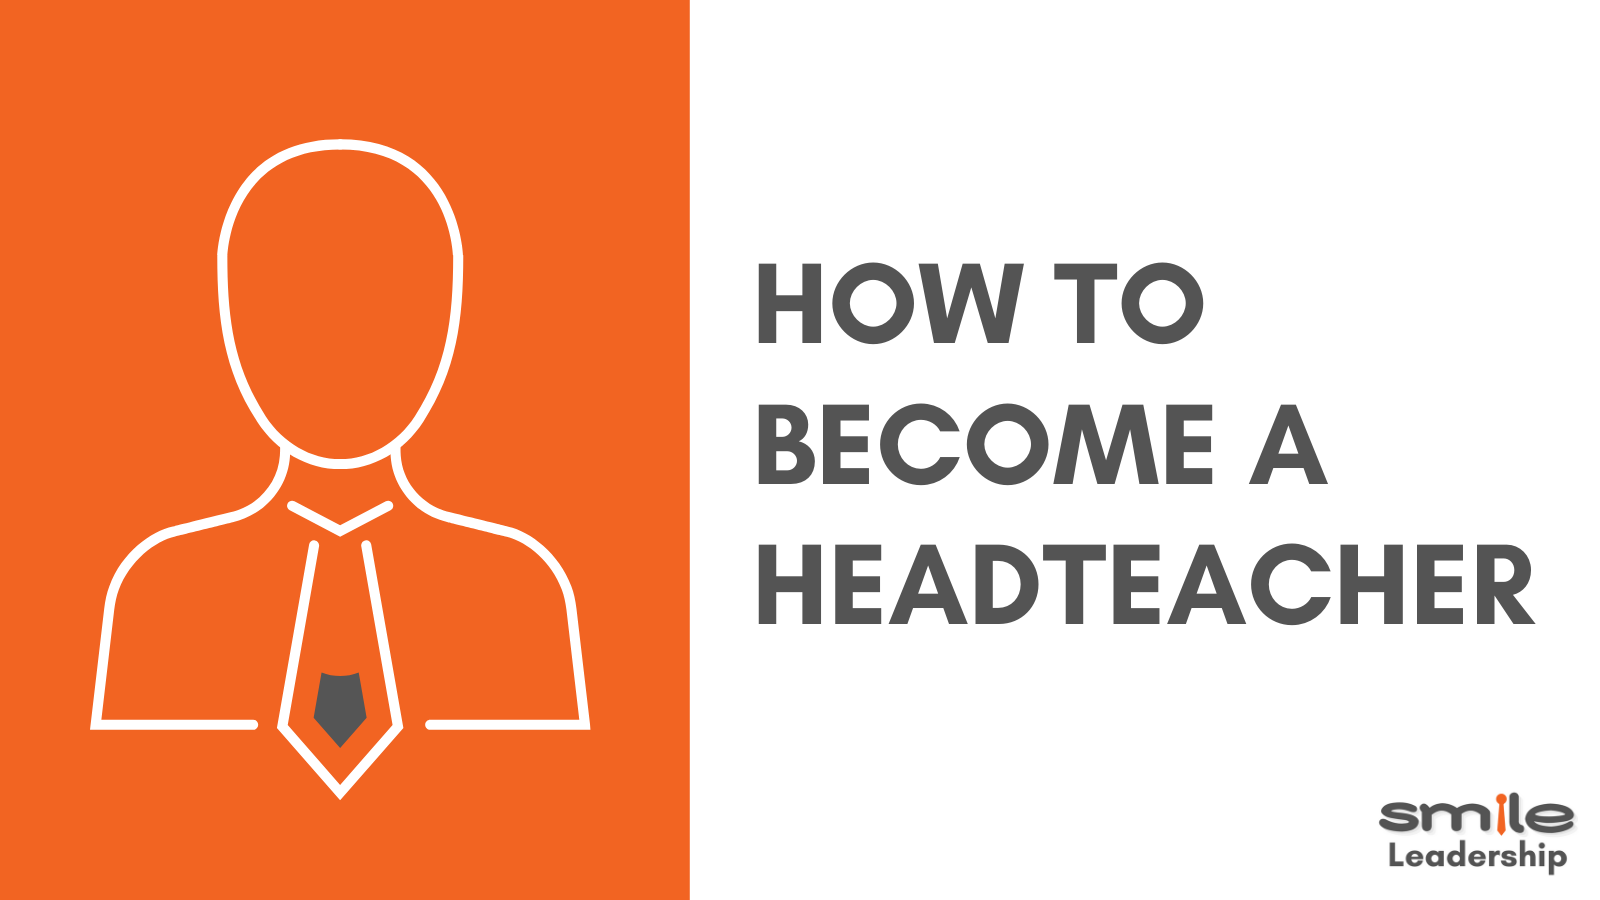 How to become a headteacher